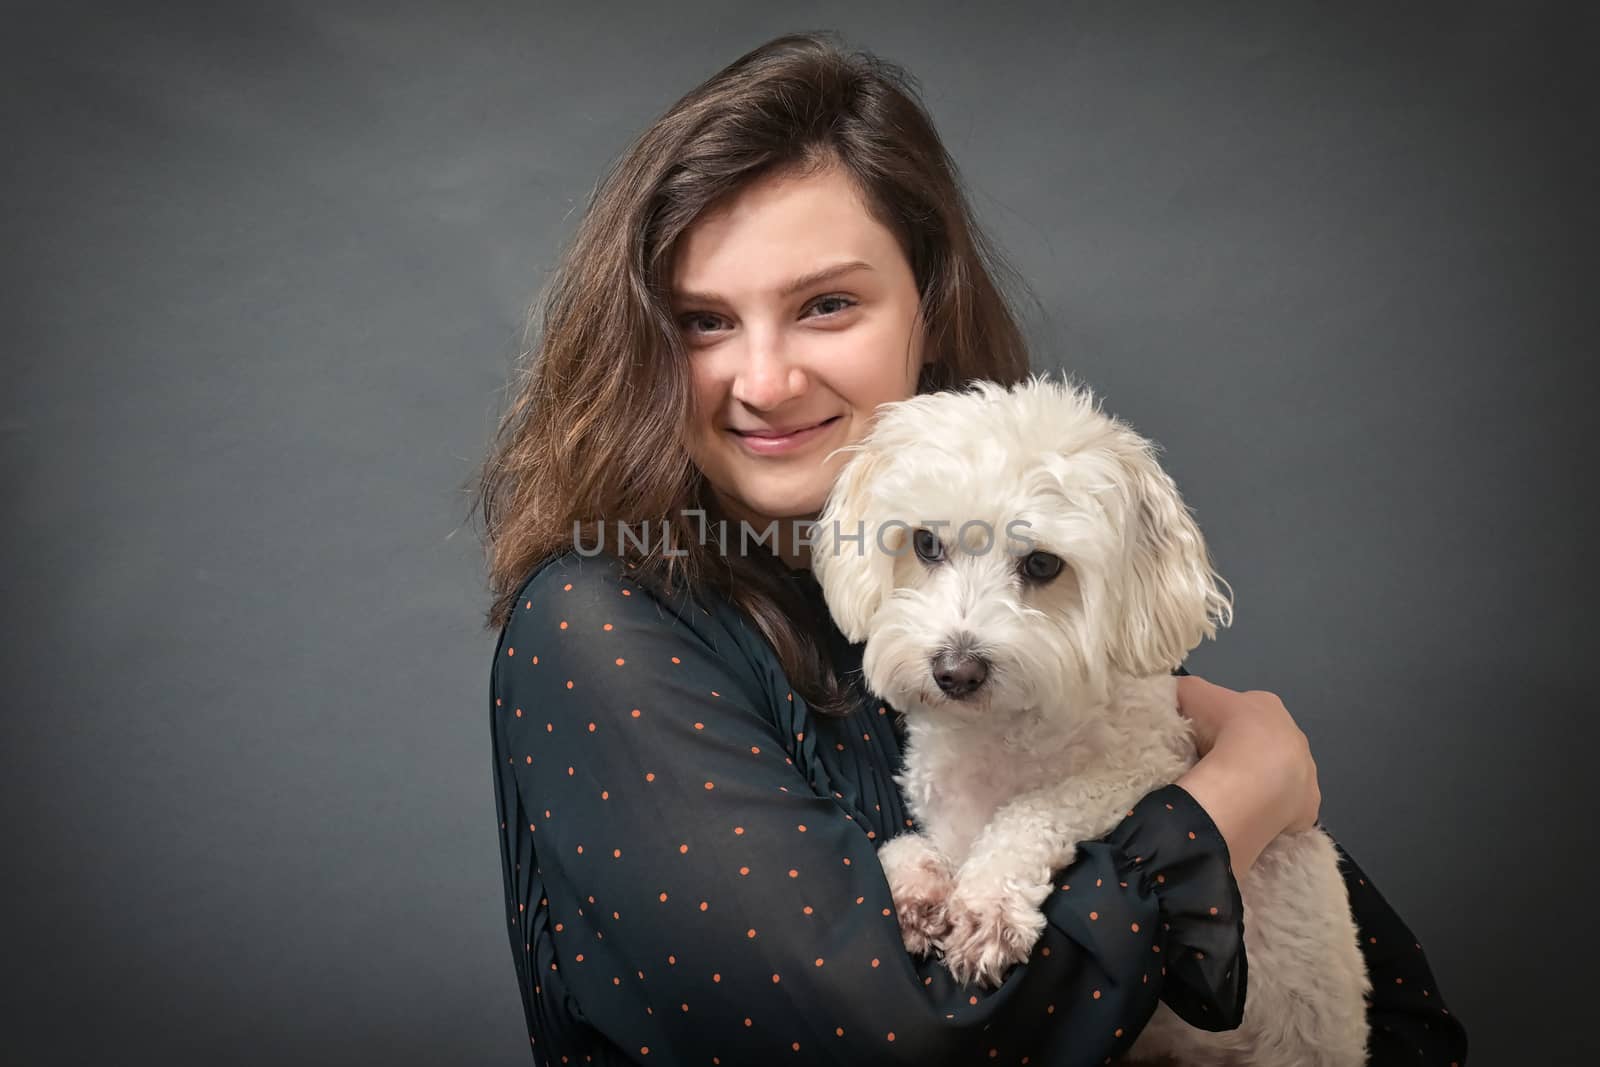 Teen Girl With Maltese Dog In Her Hands by mady70